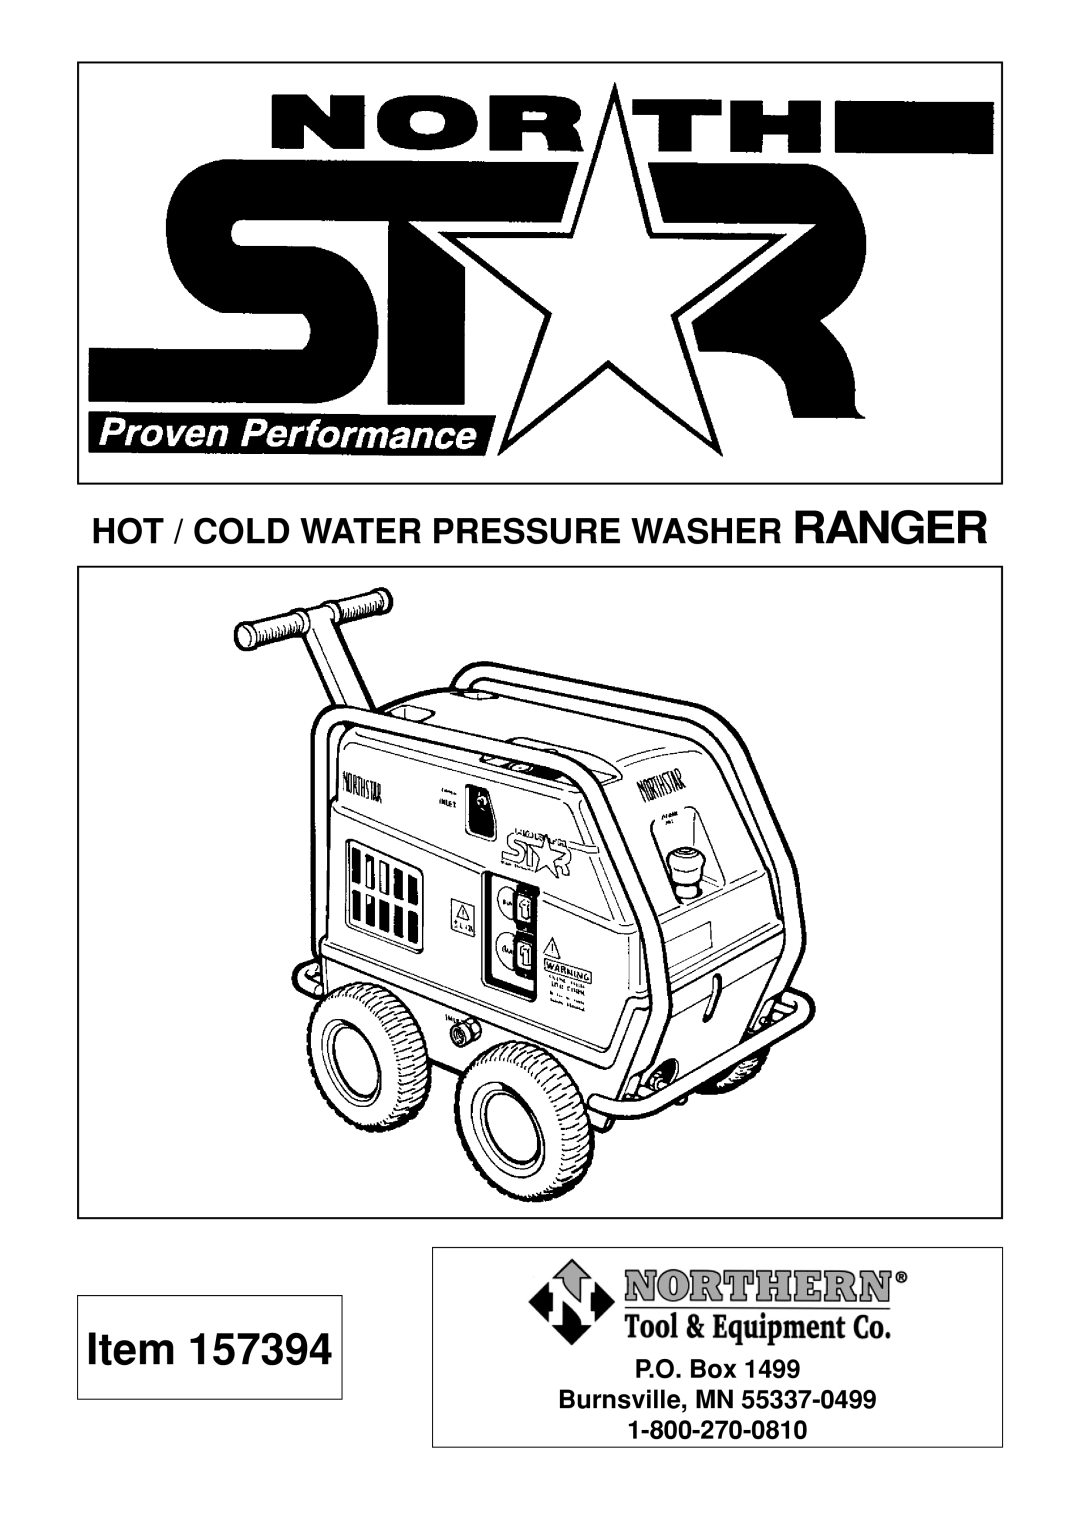 North Star 157394 manual Hot / Cold Water Pressure Washer Ranger 